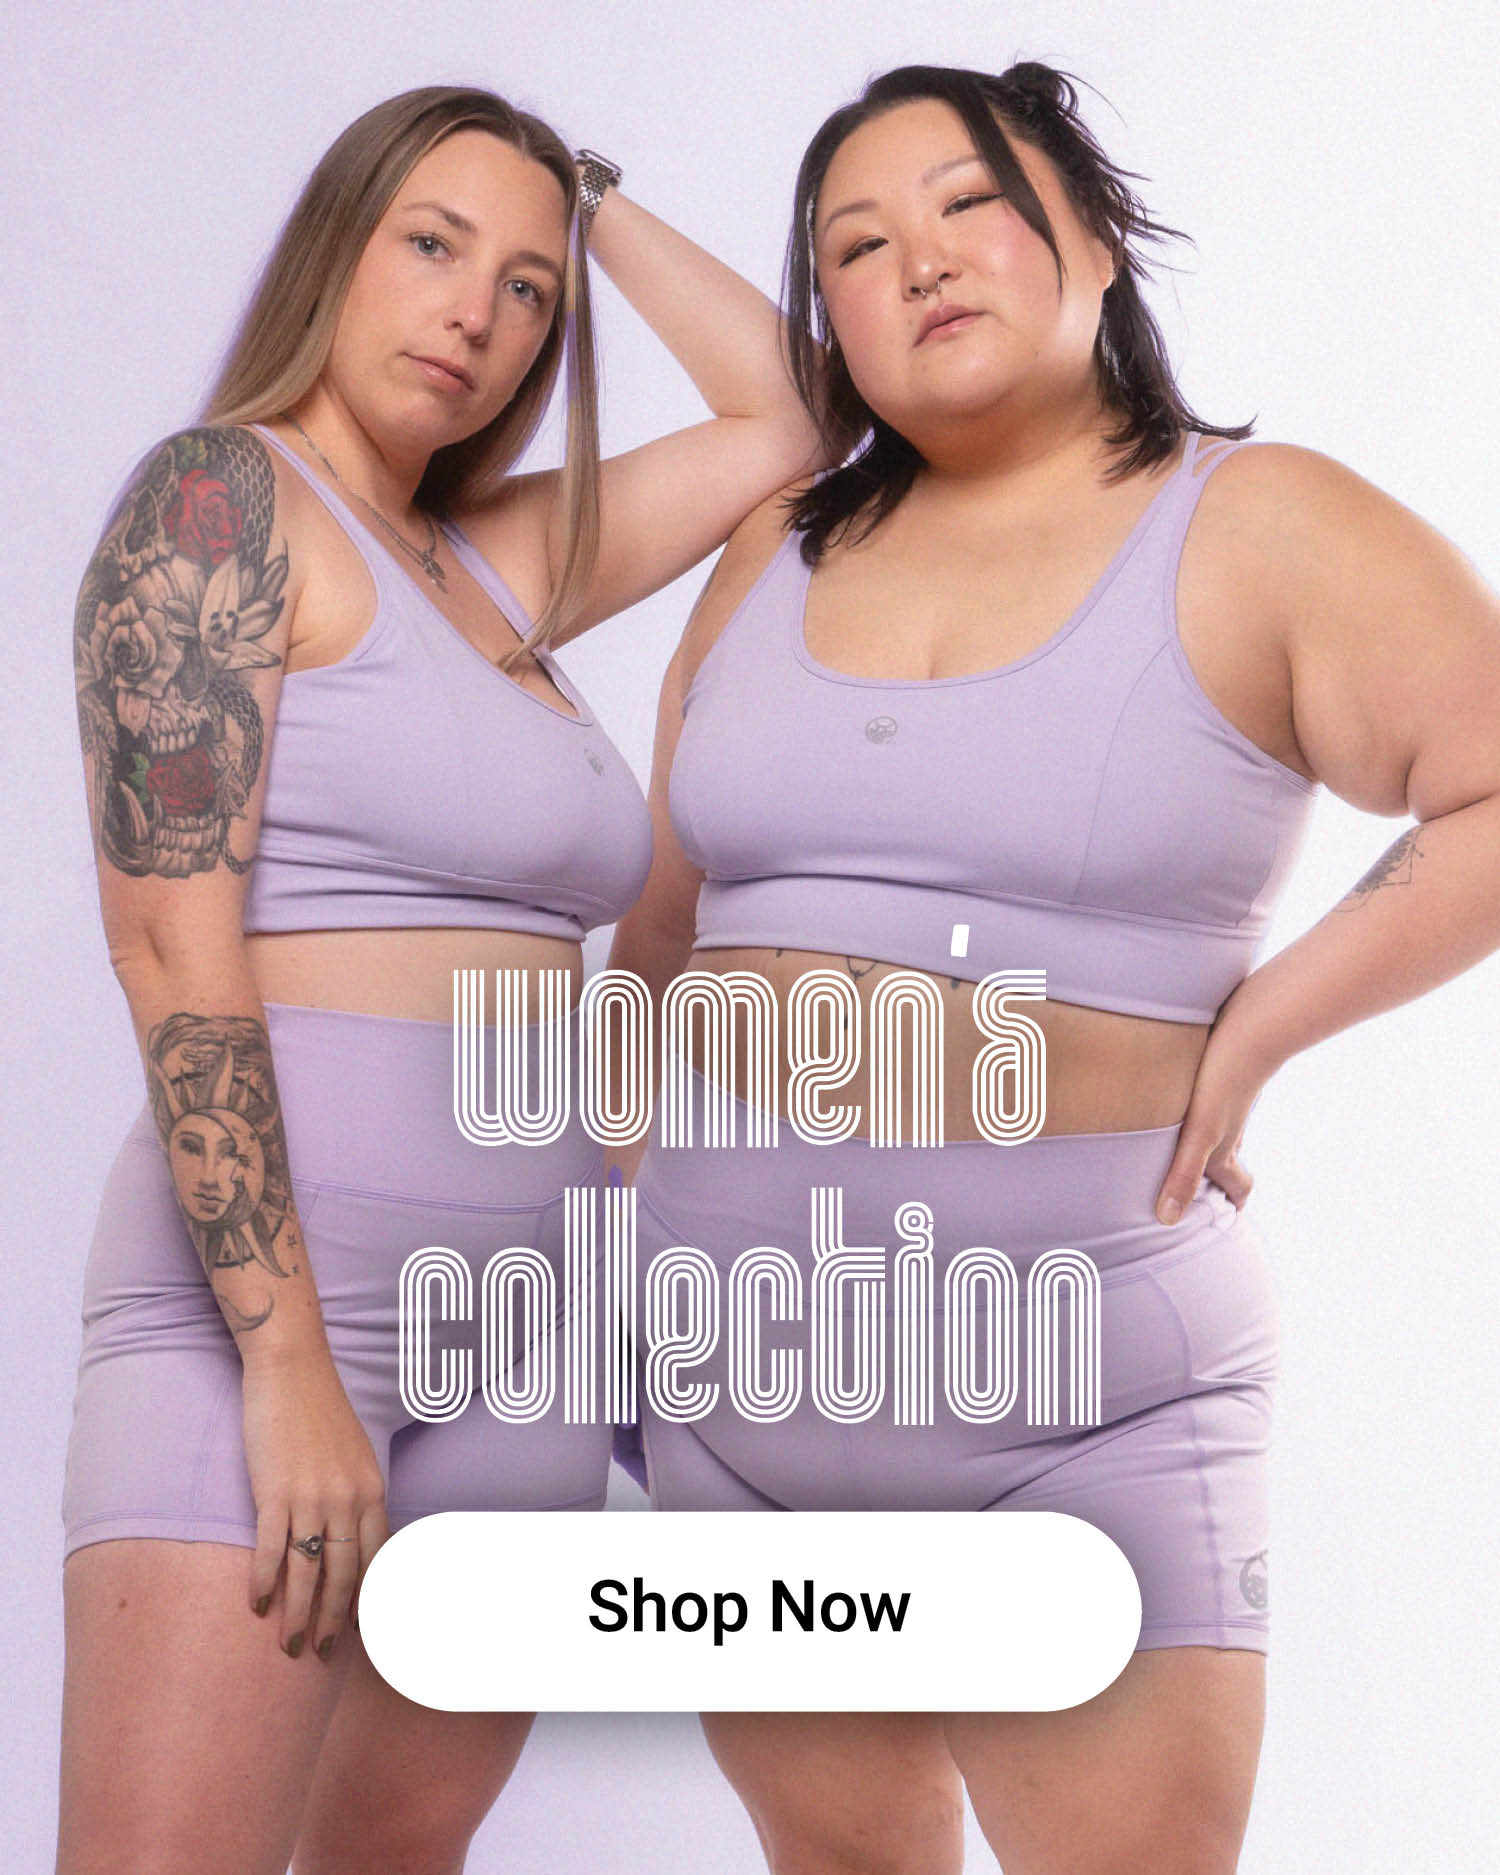 kinda fit kinda fat womens collection ranging from sports bra, compression shorts, boxy tee, & crop tops - shop now